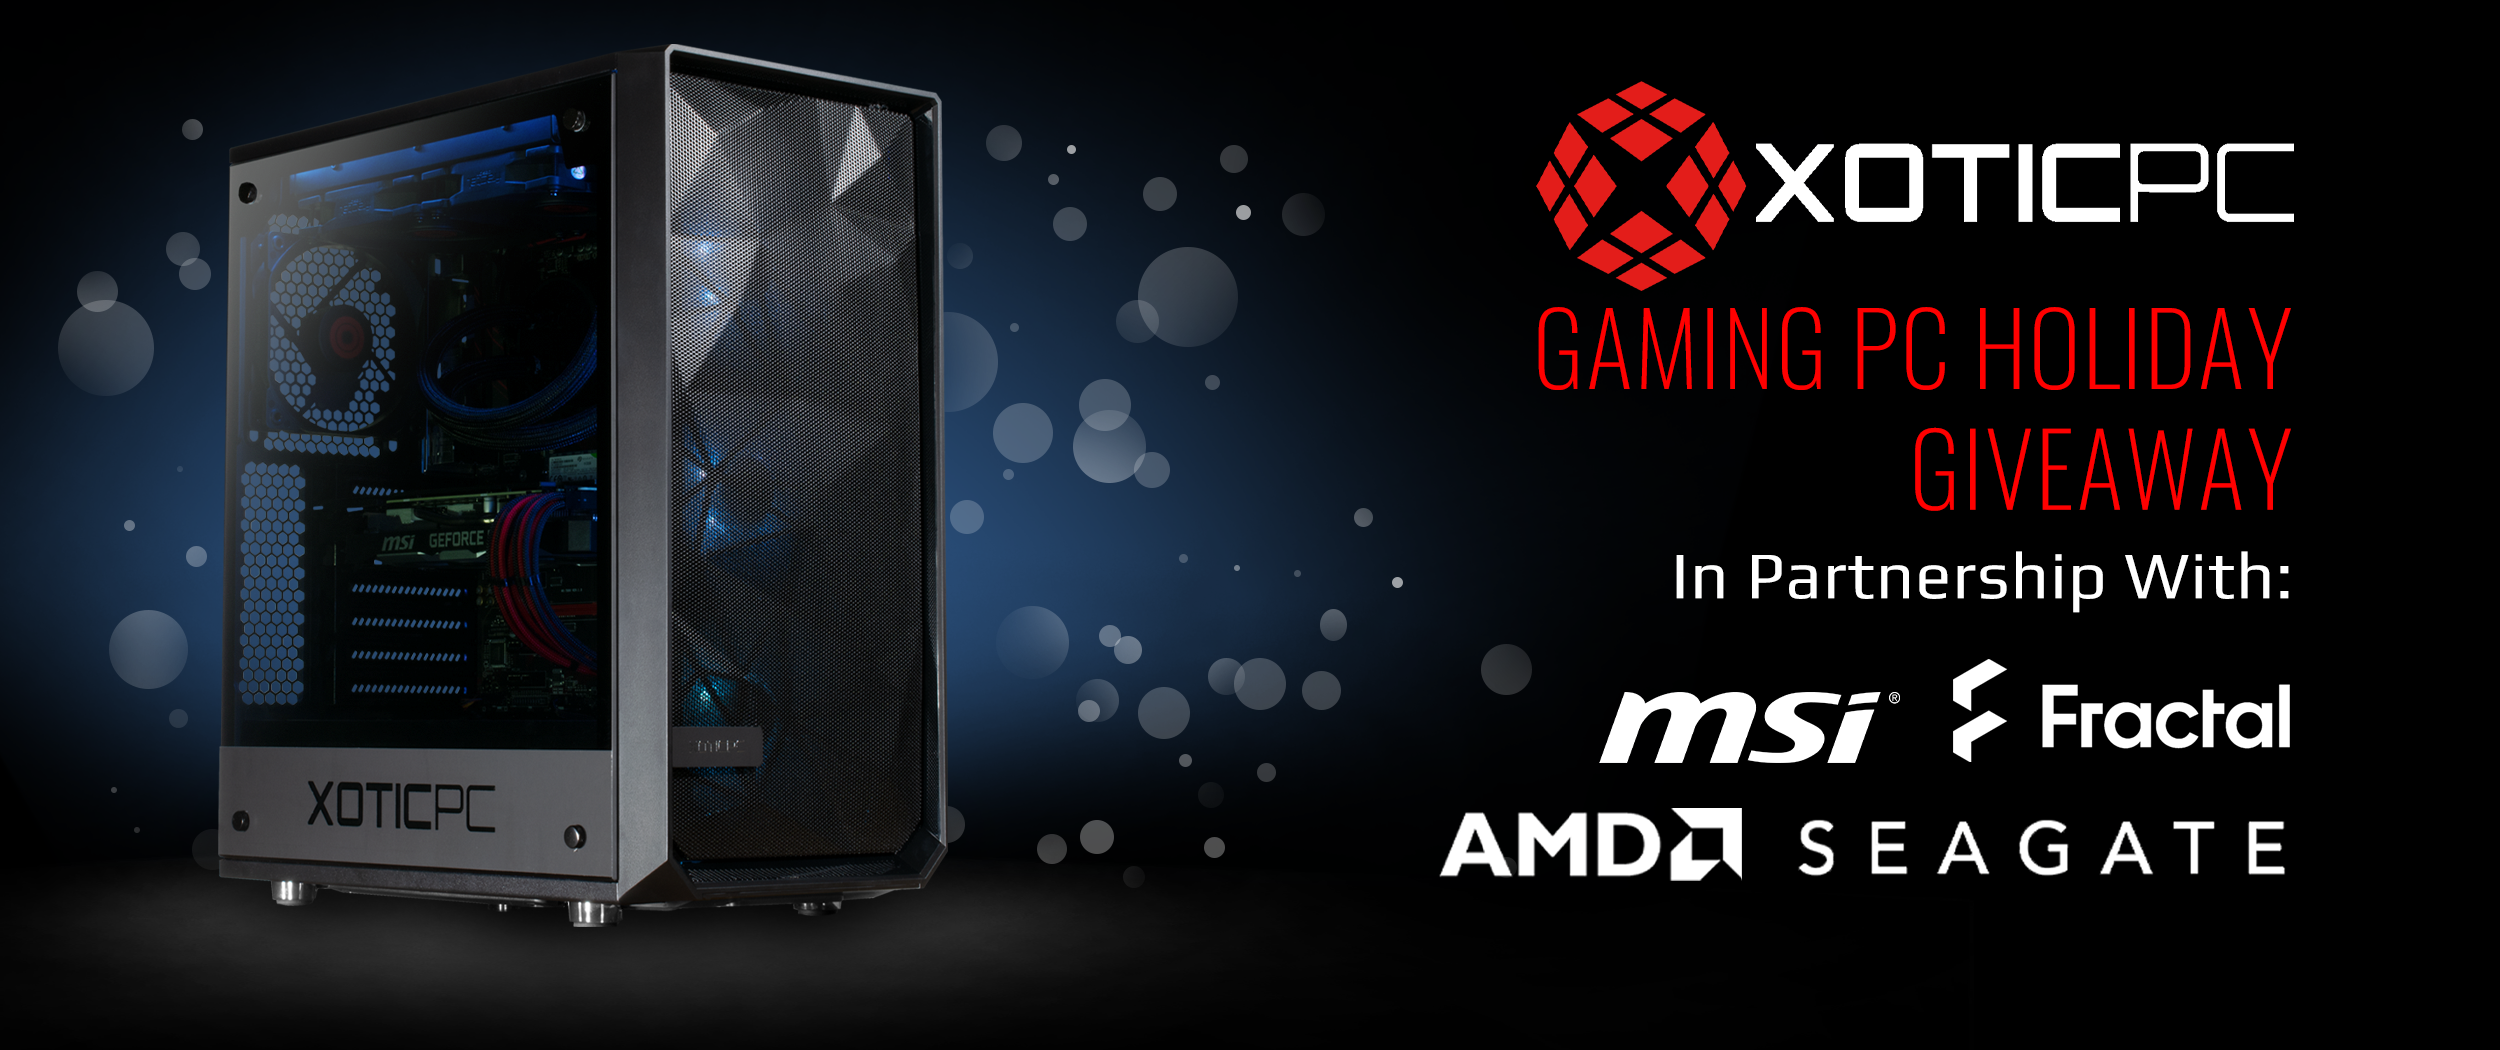 PC GAMING PC Holiday Giveaway!